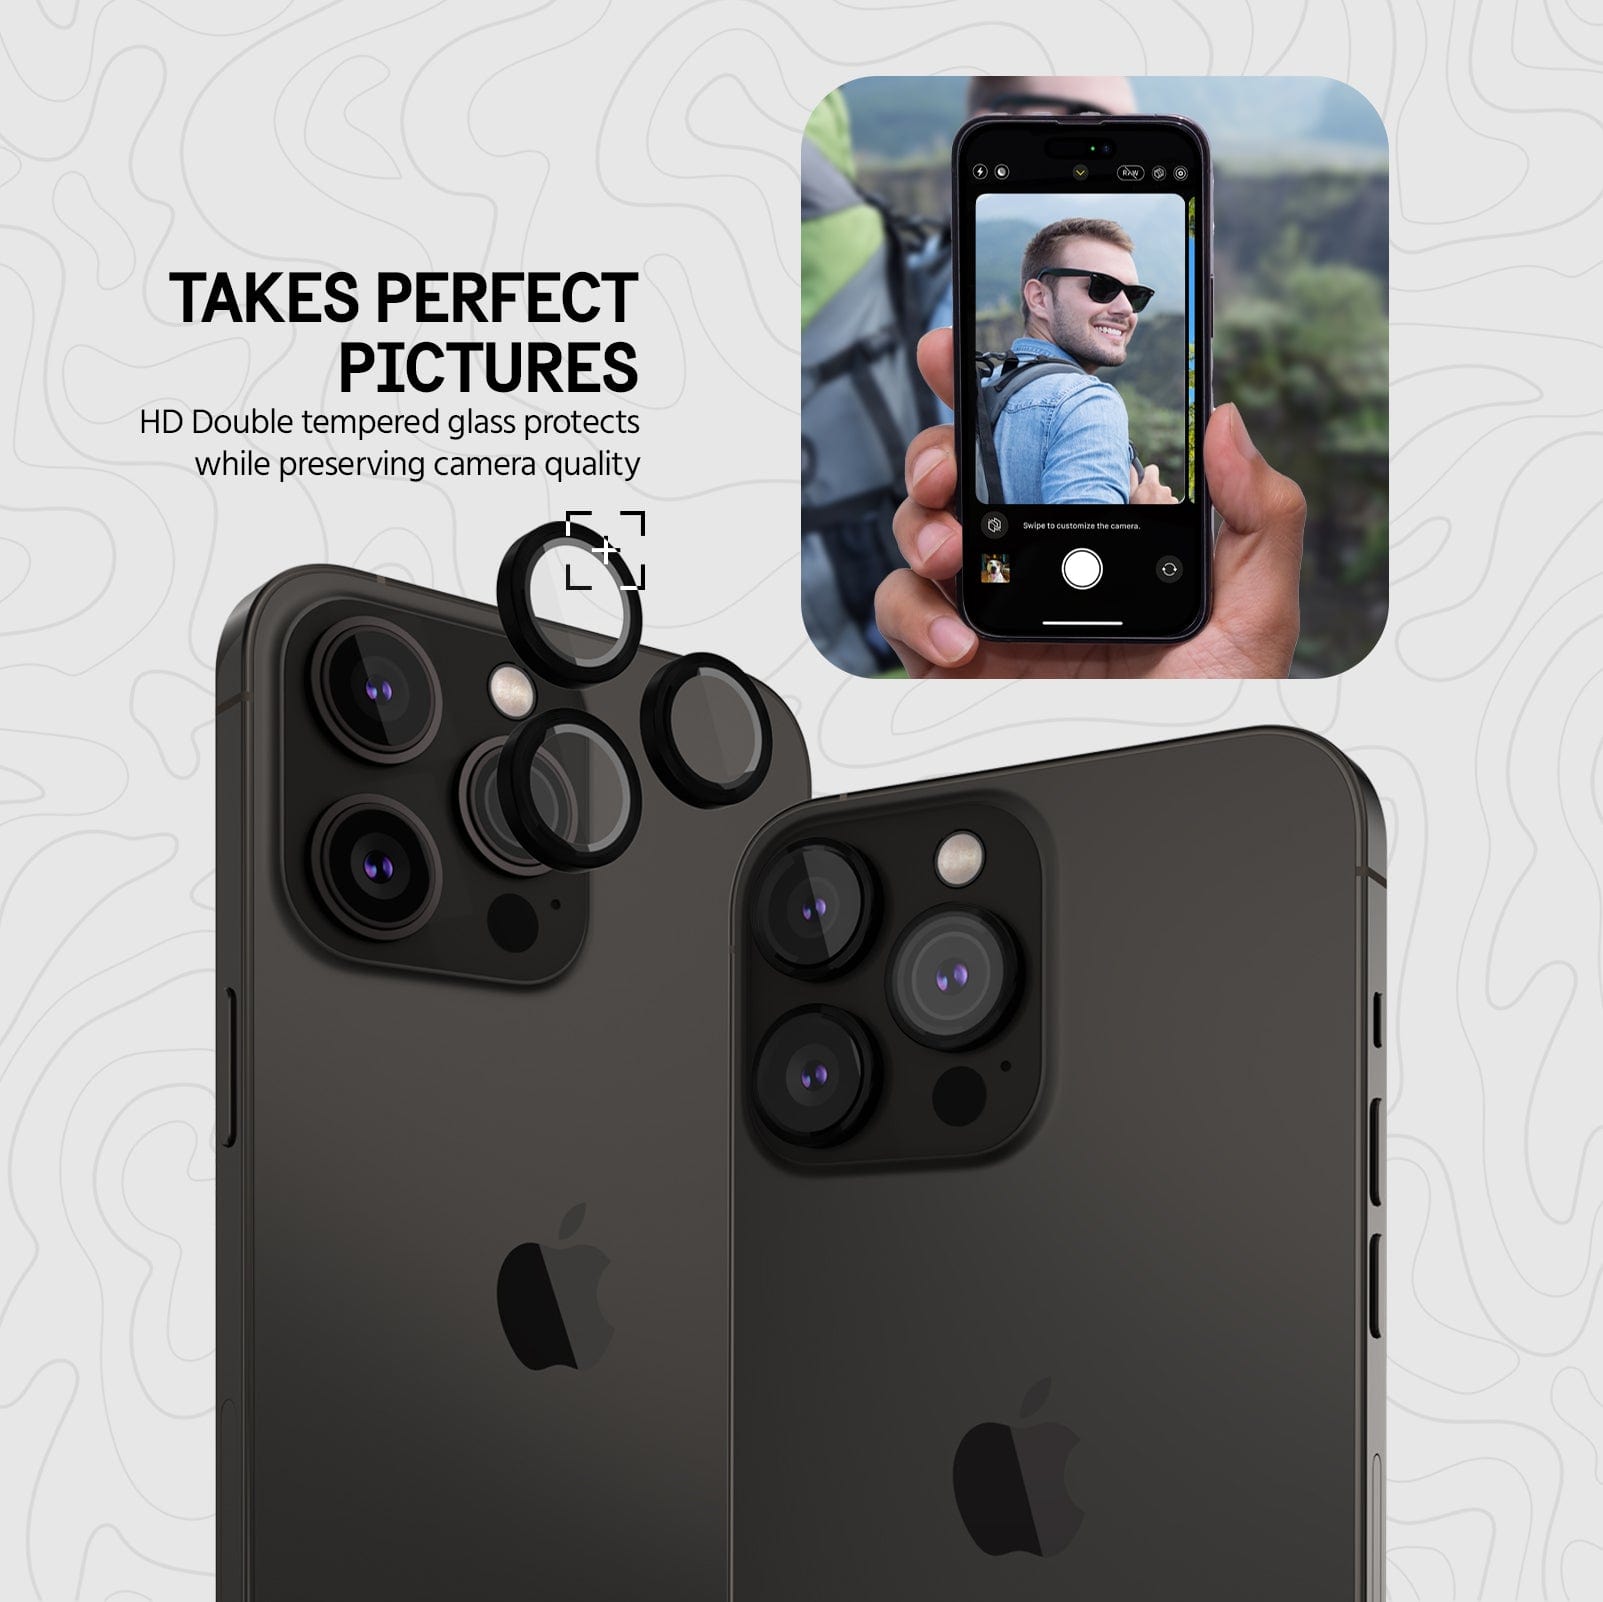 TAKES PERFECT PICTURES. HD DOUBLE TEMPERED GLASS PROTECTS WHILE PRESERVING CAMERA QUALITY